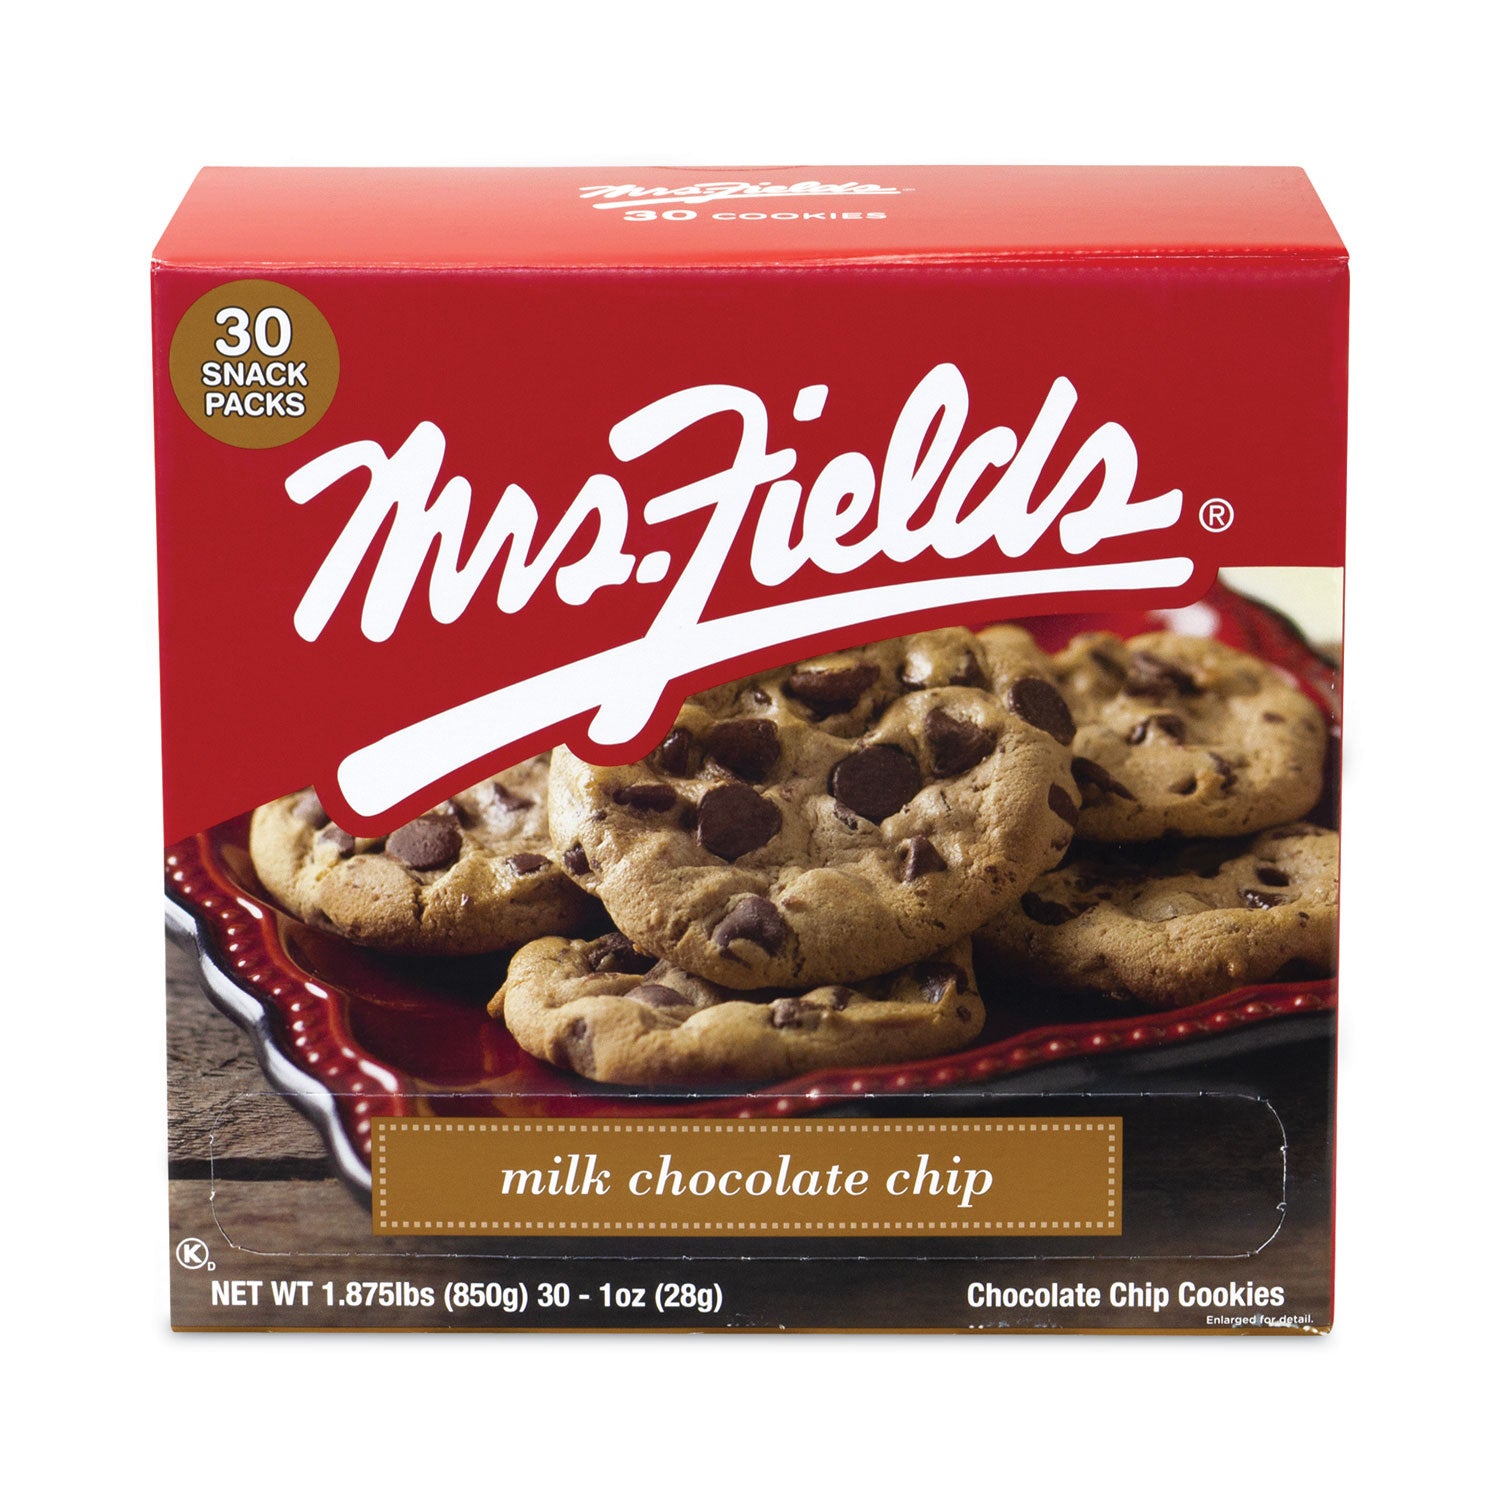 milk-chocolate-chip-cookies-1-oz-indidually-wrapped-pack-30-carton-ships-in-1-3-business-days_grr21200009 - 1